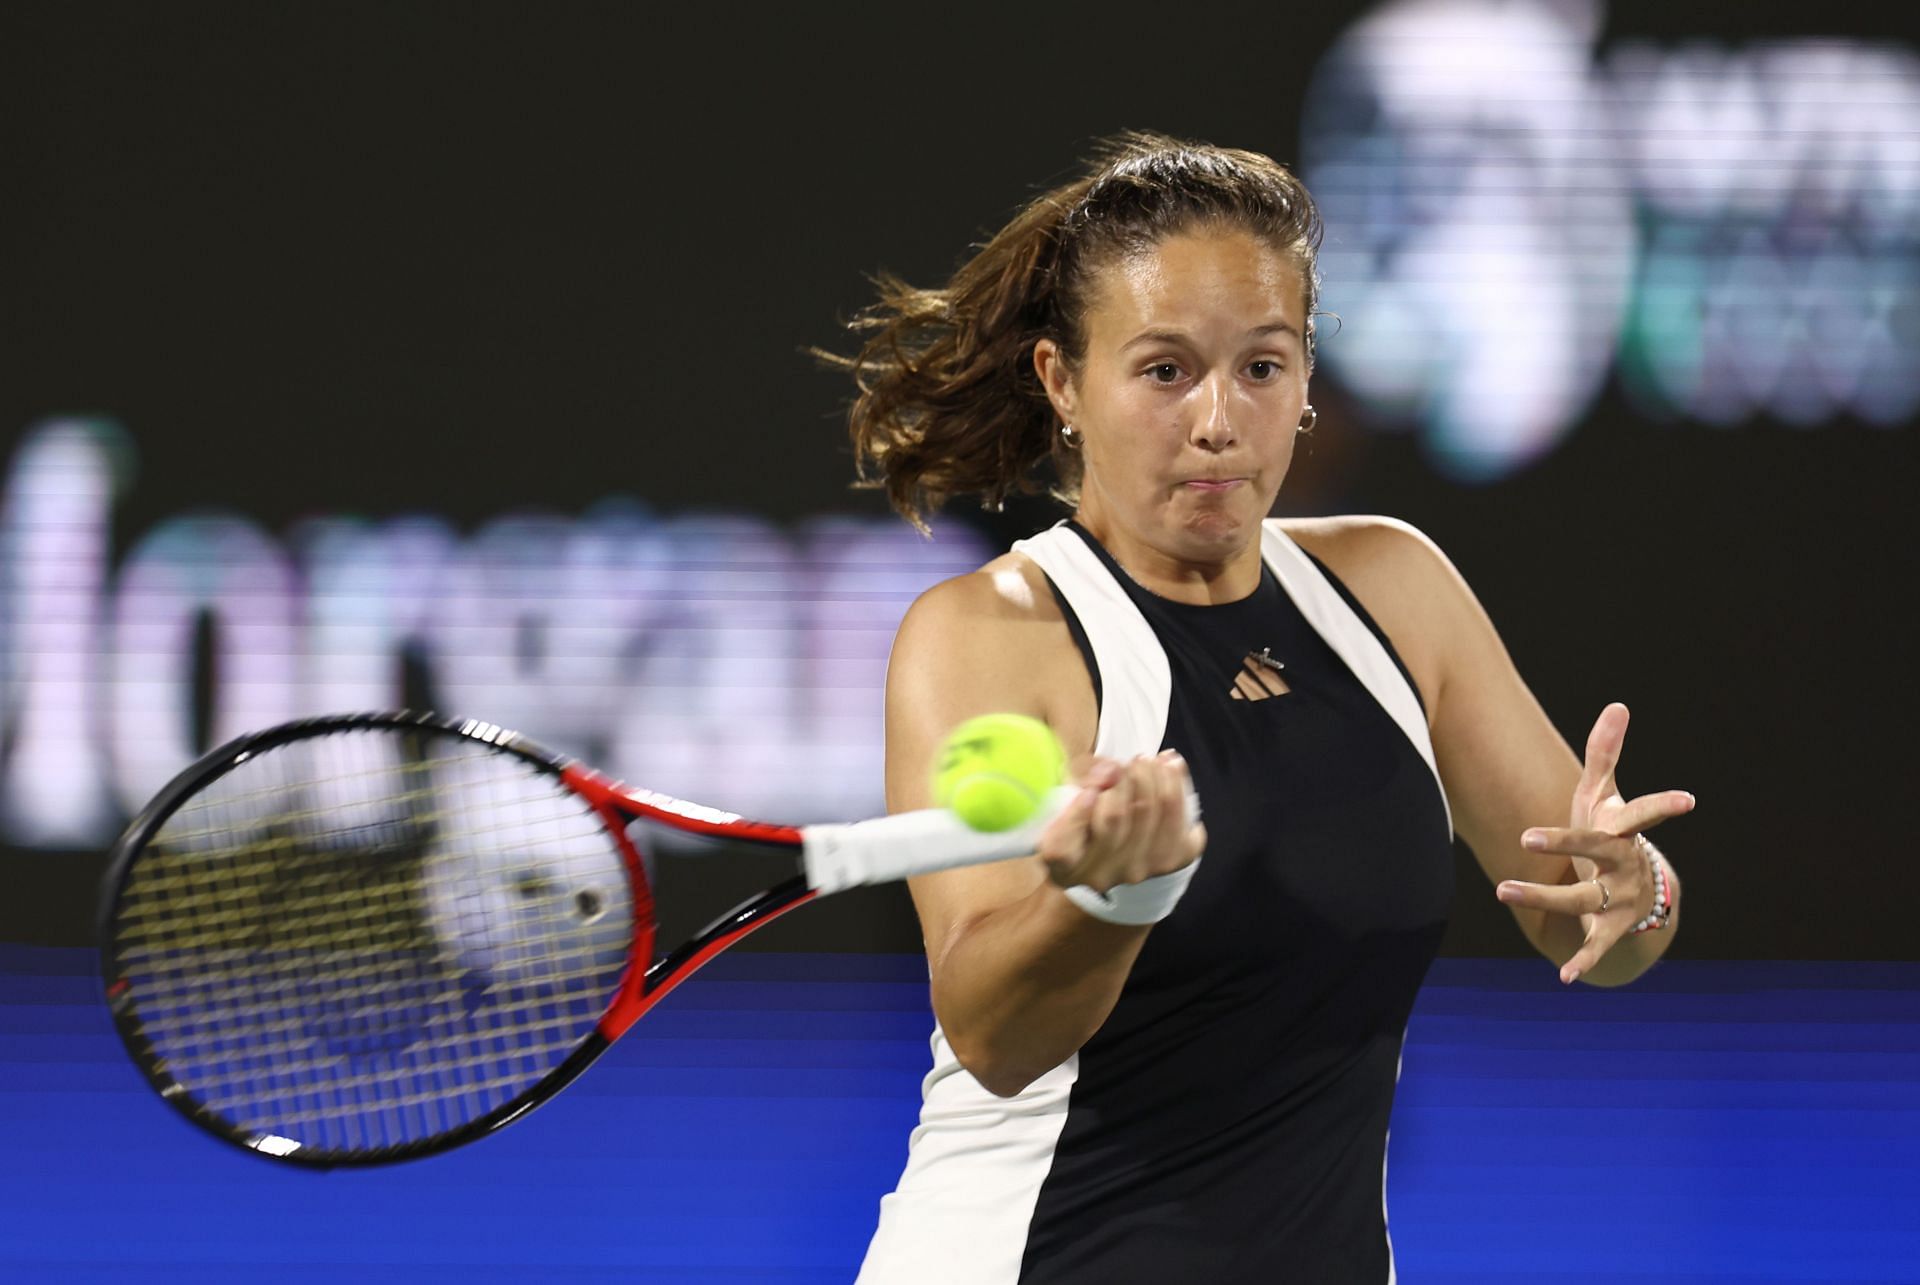 Daria Kasatkina is the 11th seed at Indian Wells.